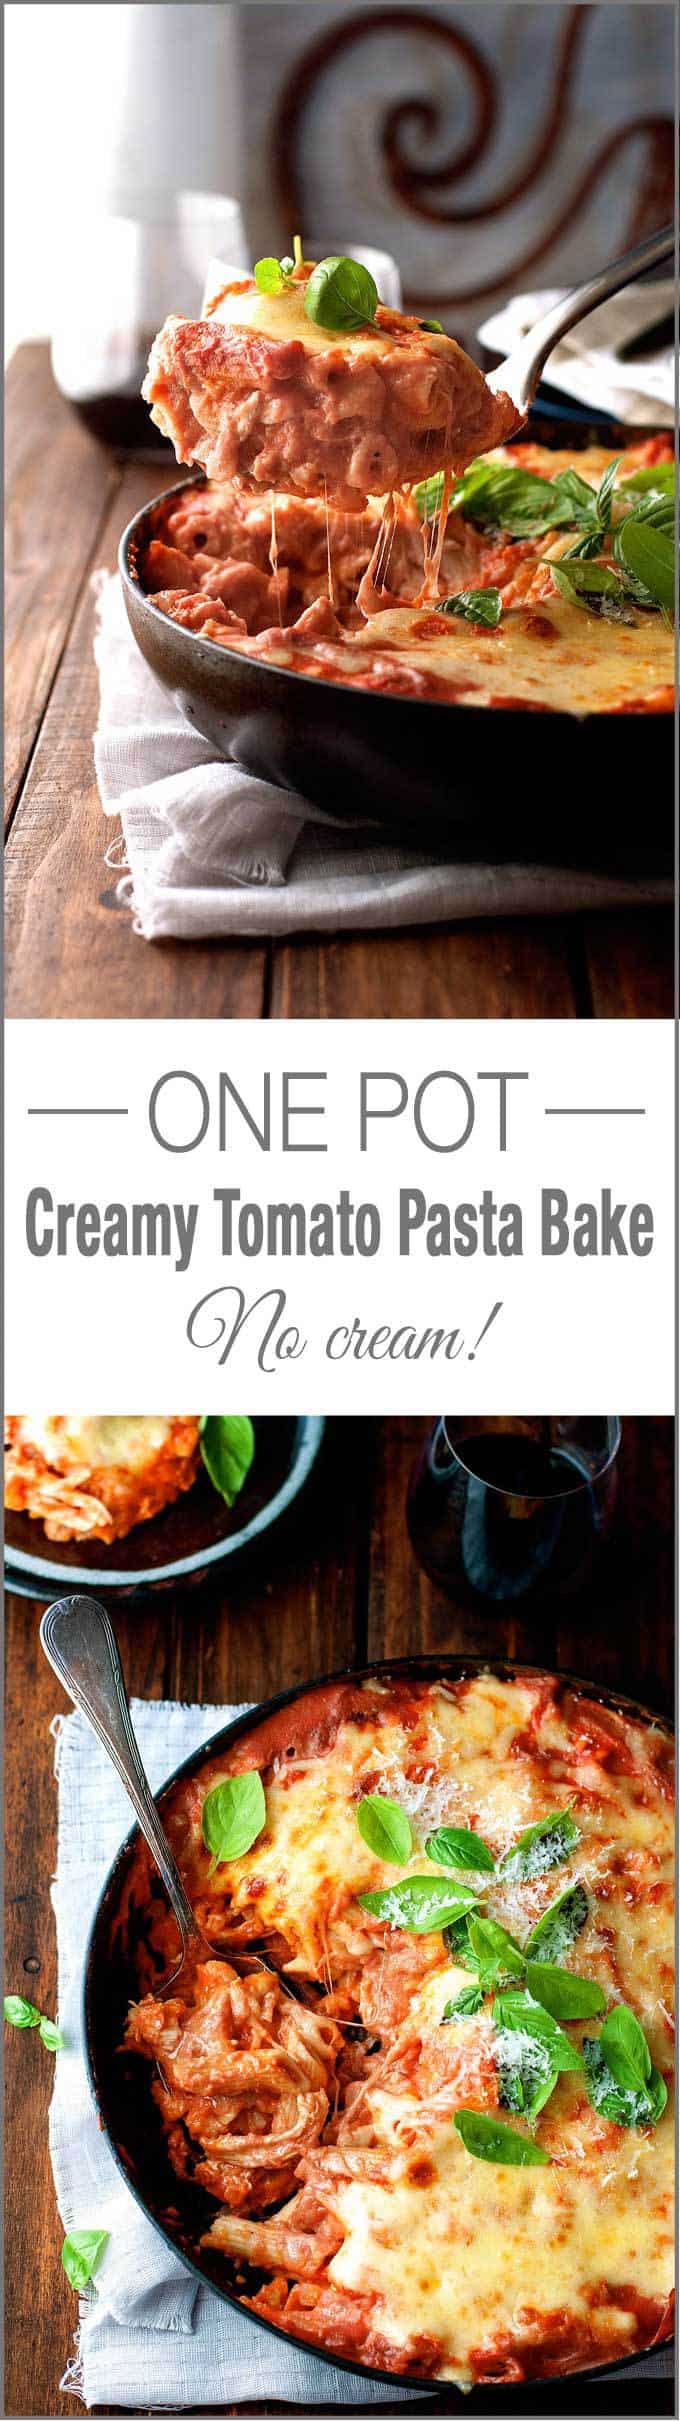 One Pot Creamy Chicken Tomato Pasta Bake - all made in one pot with no cream!